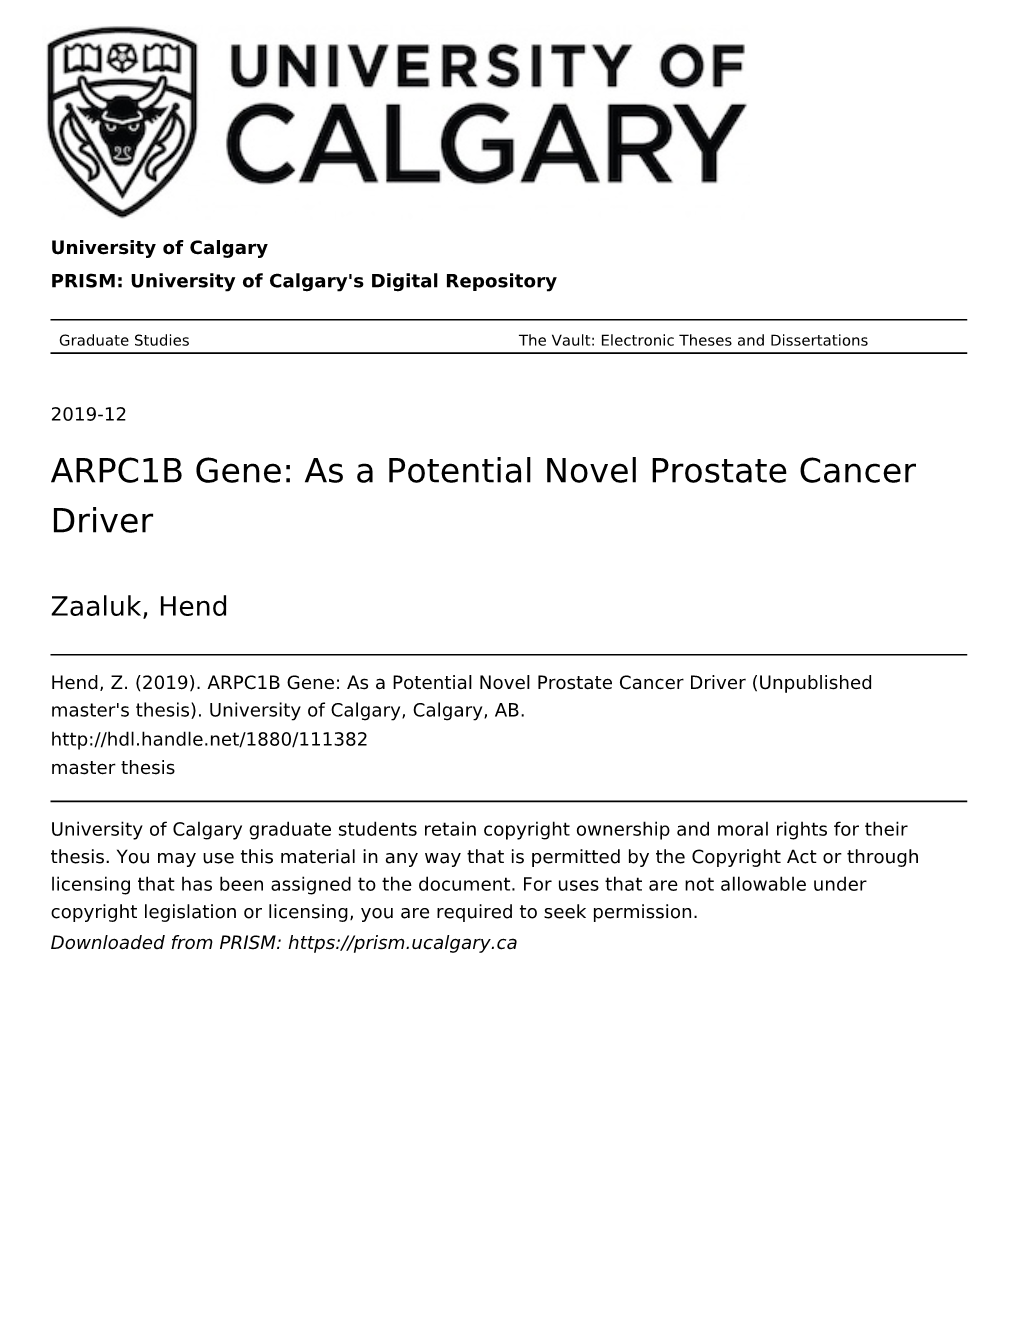 ARPC1B Gene: As a Potential Novel Prostate Cancer Driver